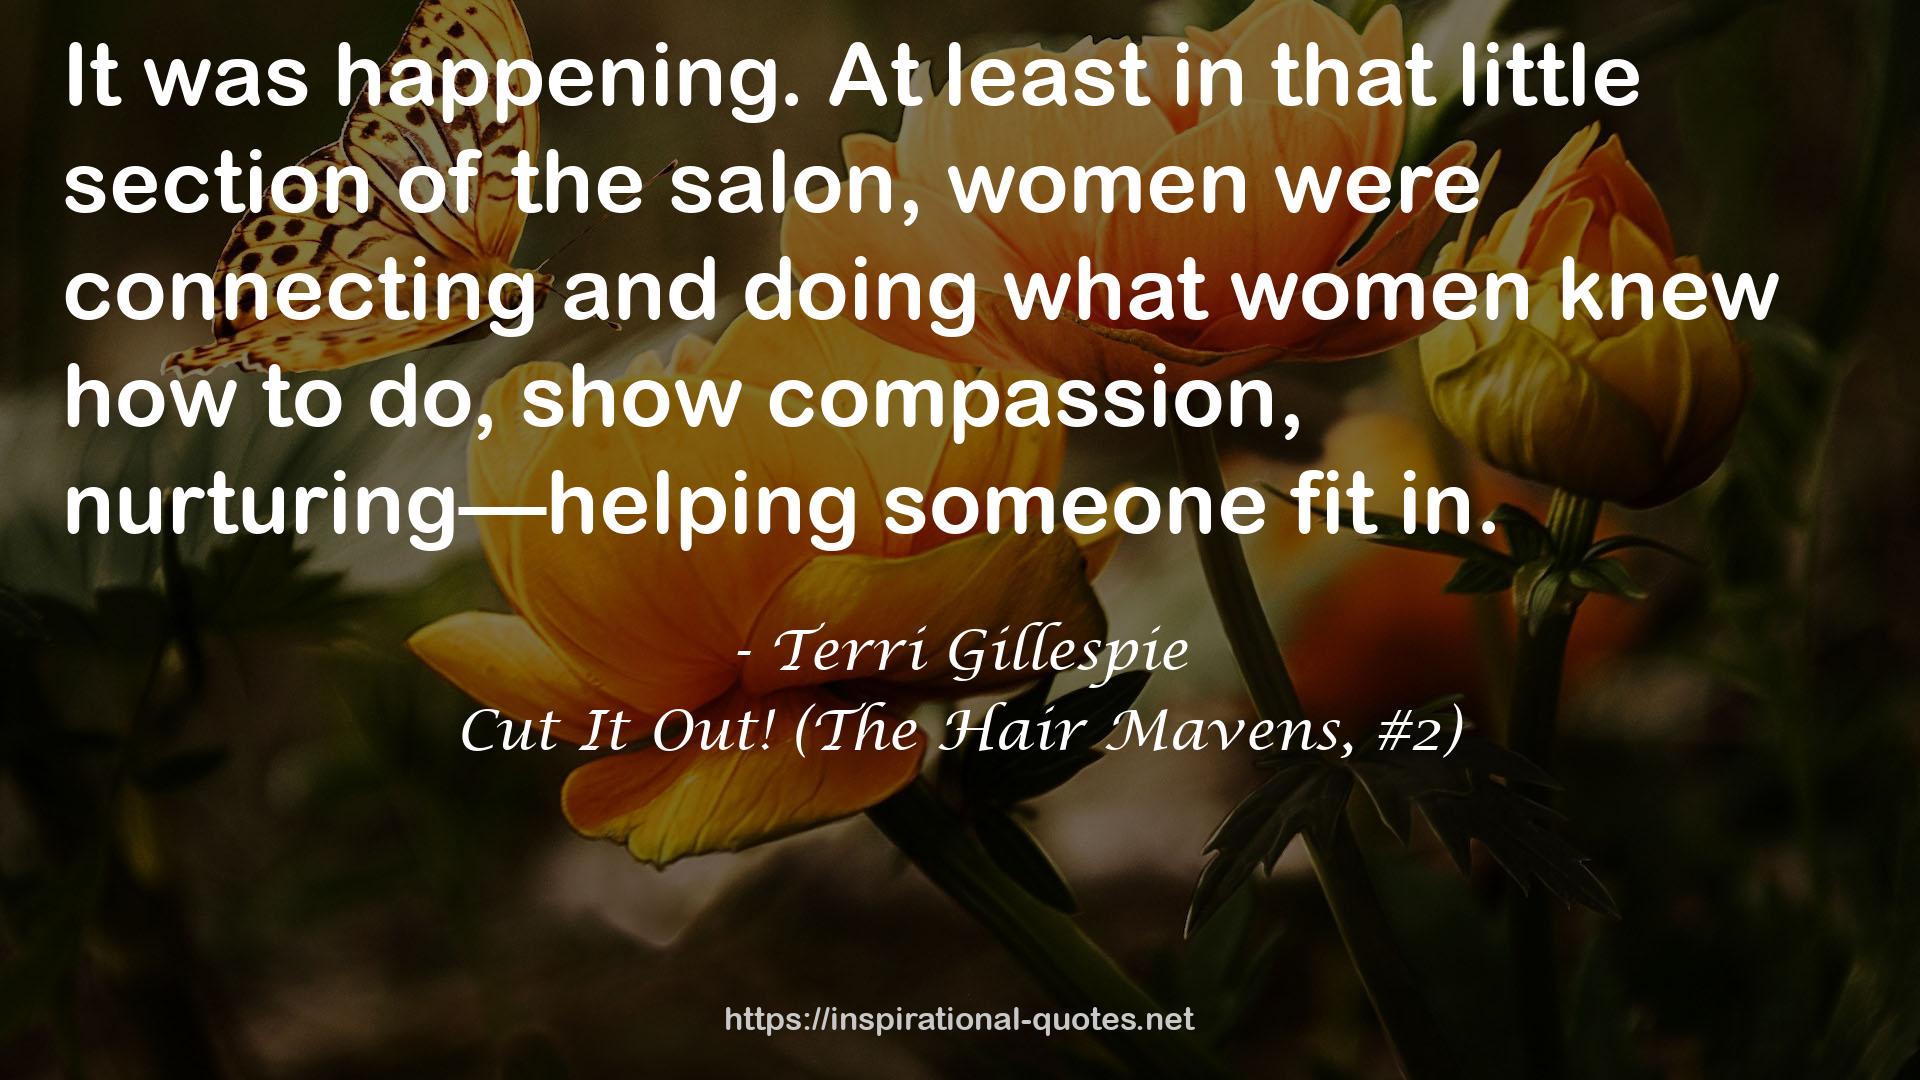 Cut It Out! (The Hair Mavens, #2) QUOTES